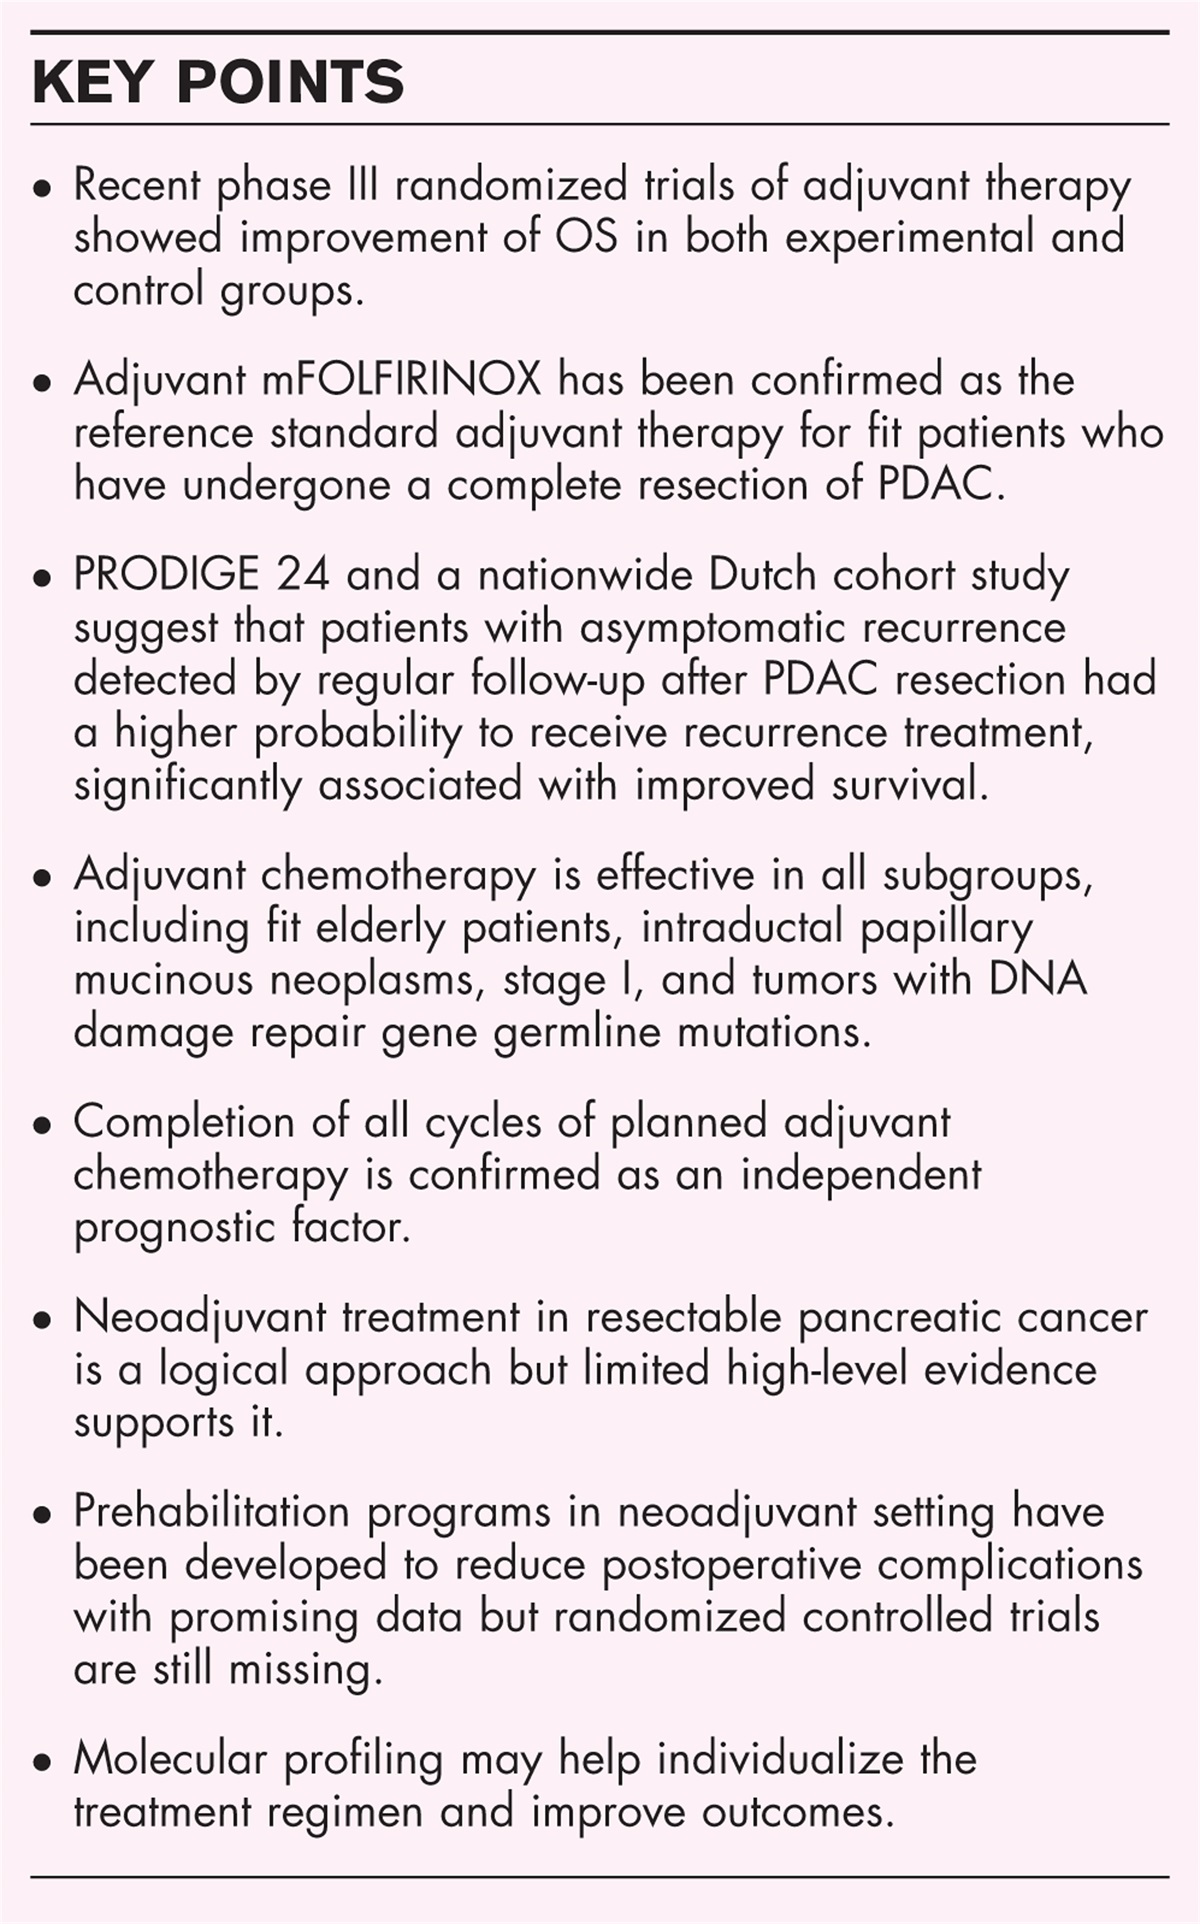 Adjuvant and neoadjuvant approaches in pancreatic cancer